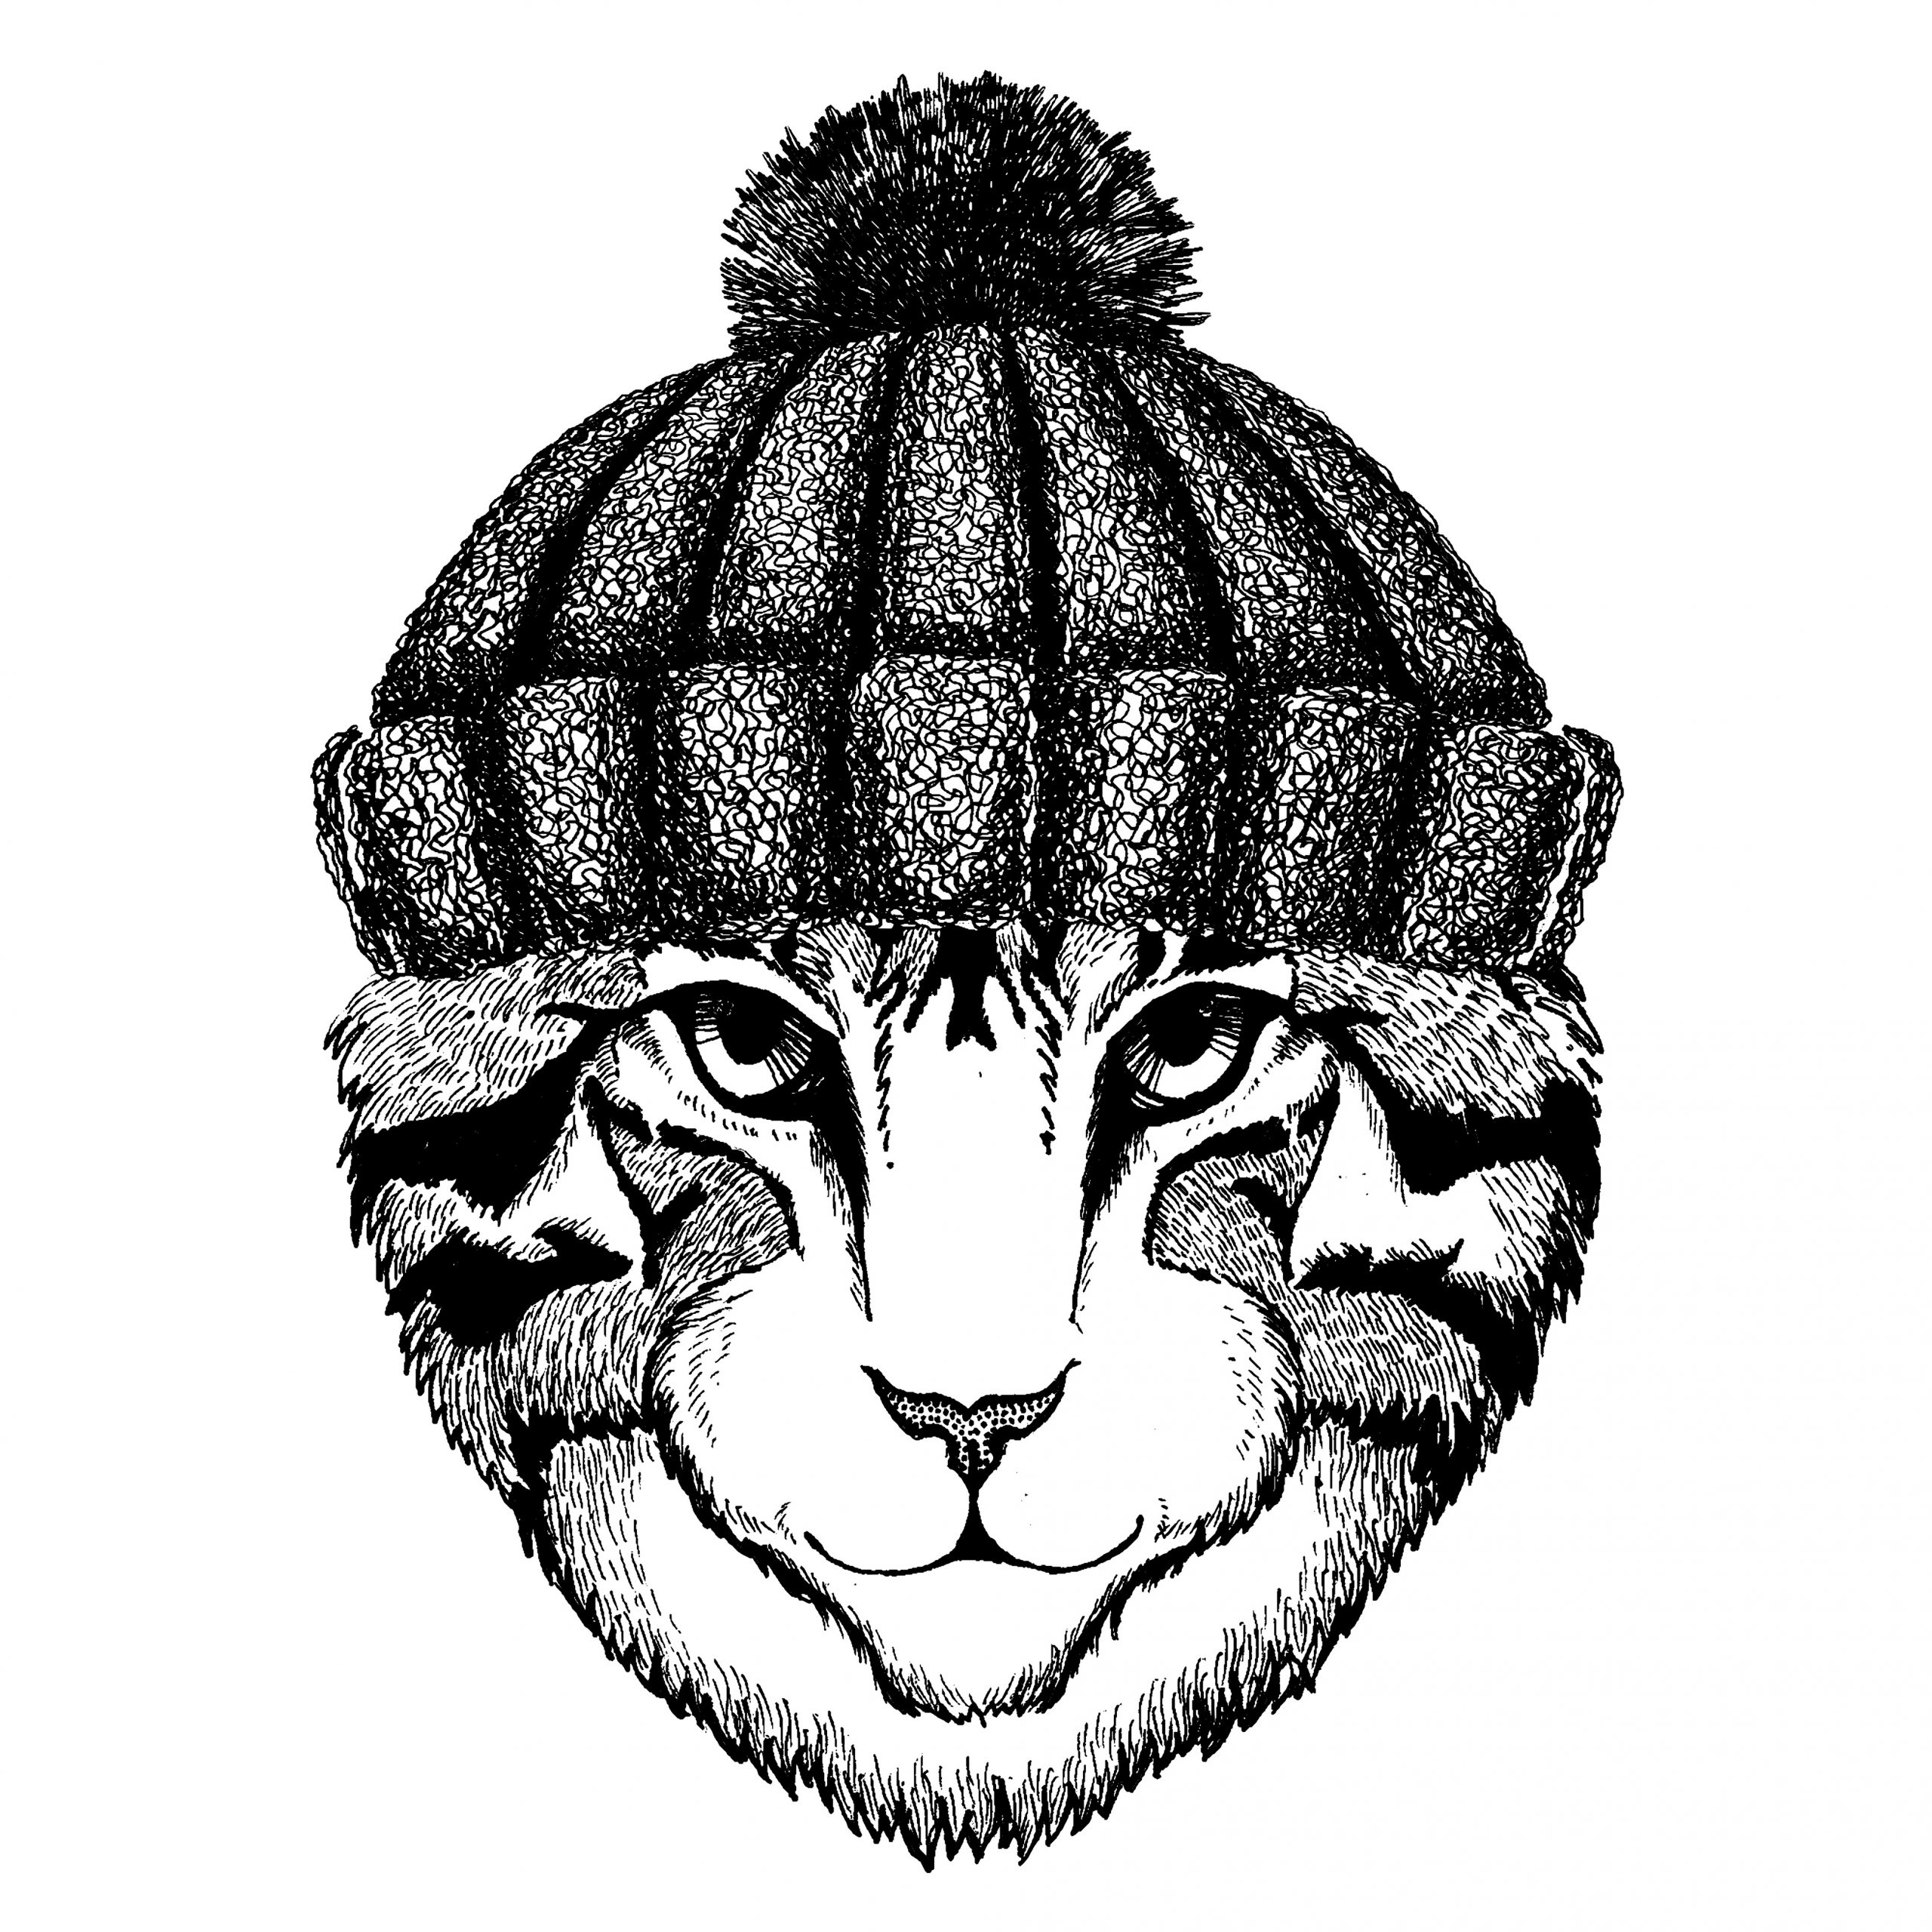 Image of domestic cat Hand drawn illustration for tattoo, emblem, badge, logo, patch, t-shirt